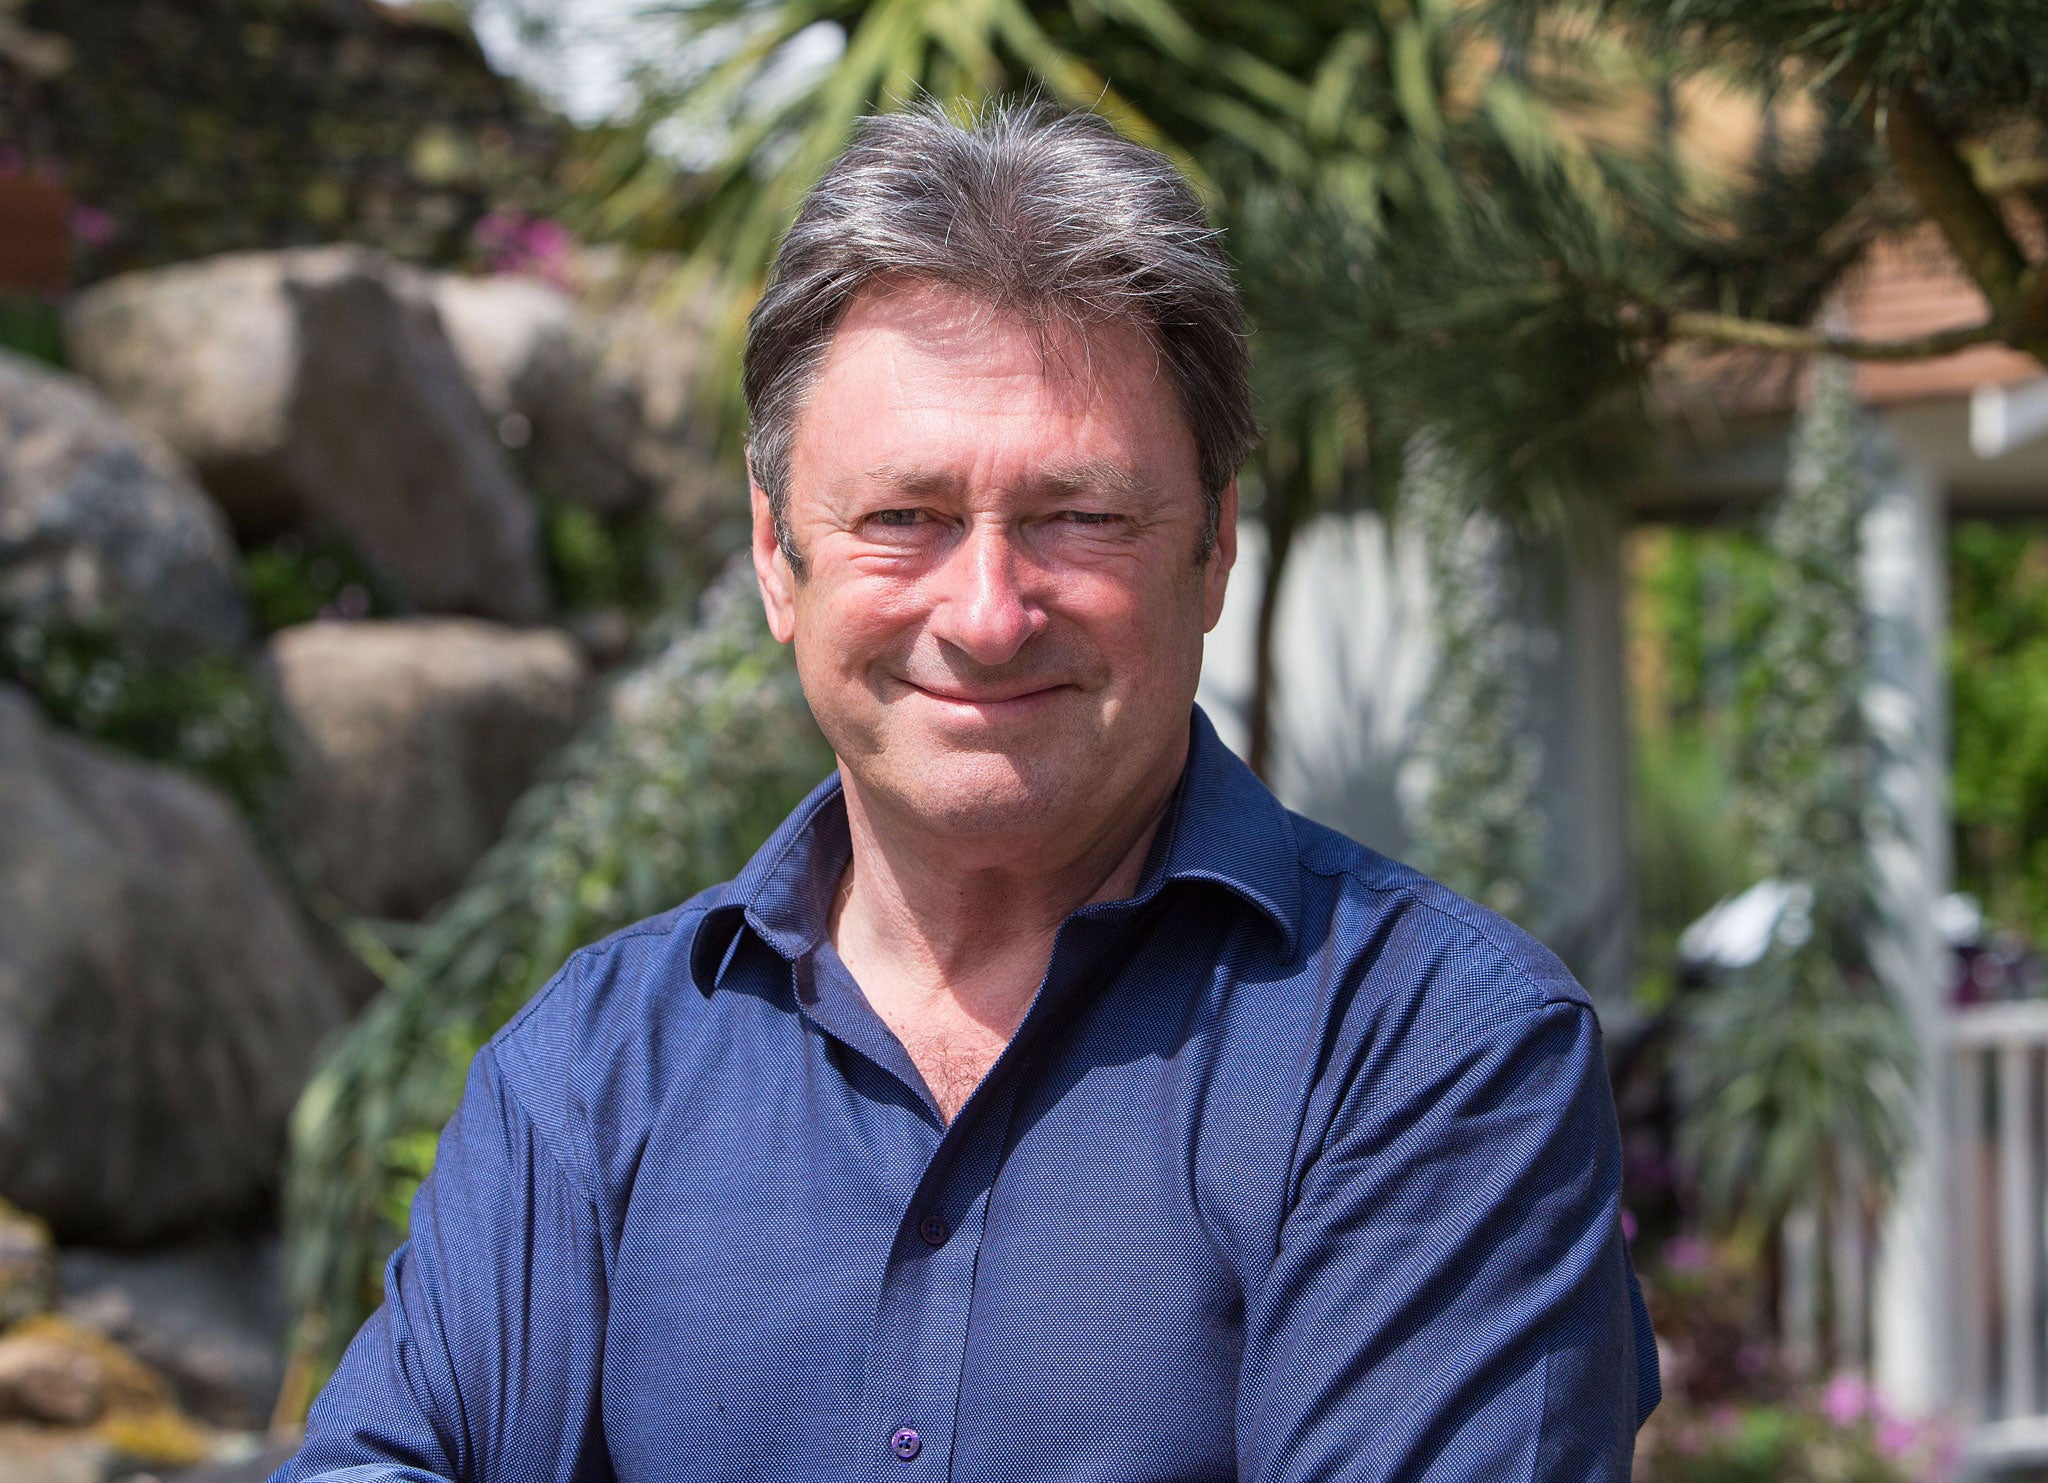 Titchmarsh compares himself to Mole in Wind in the Willows: 'A man of the soil, rather shy and sometimes solitary'